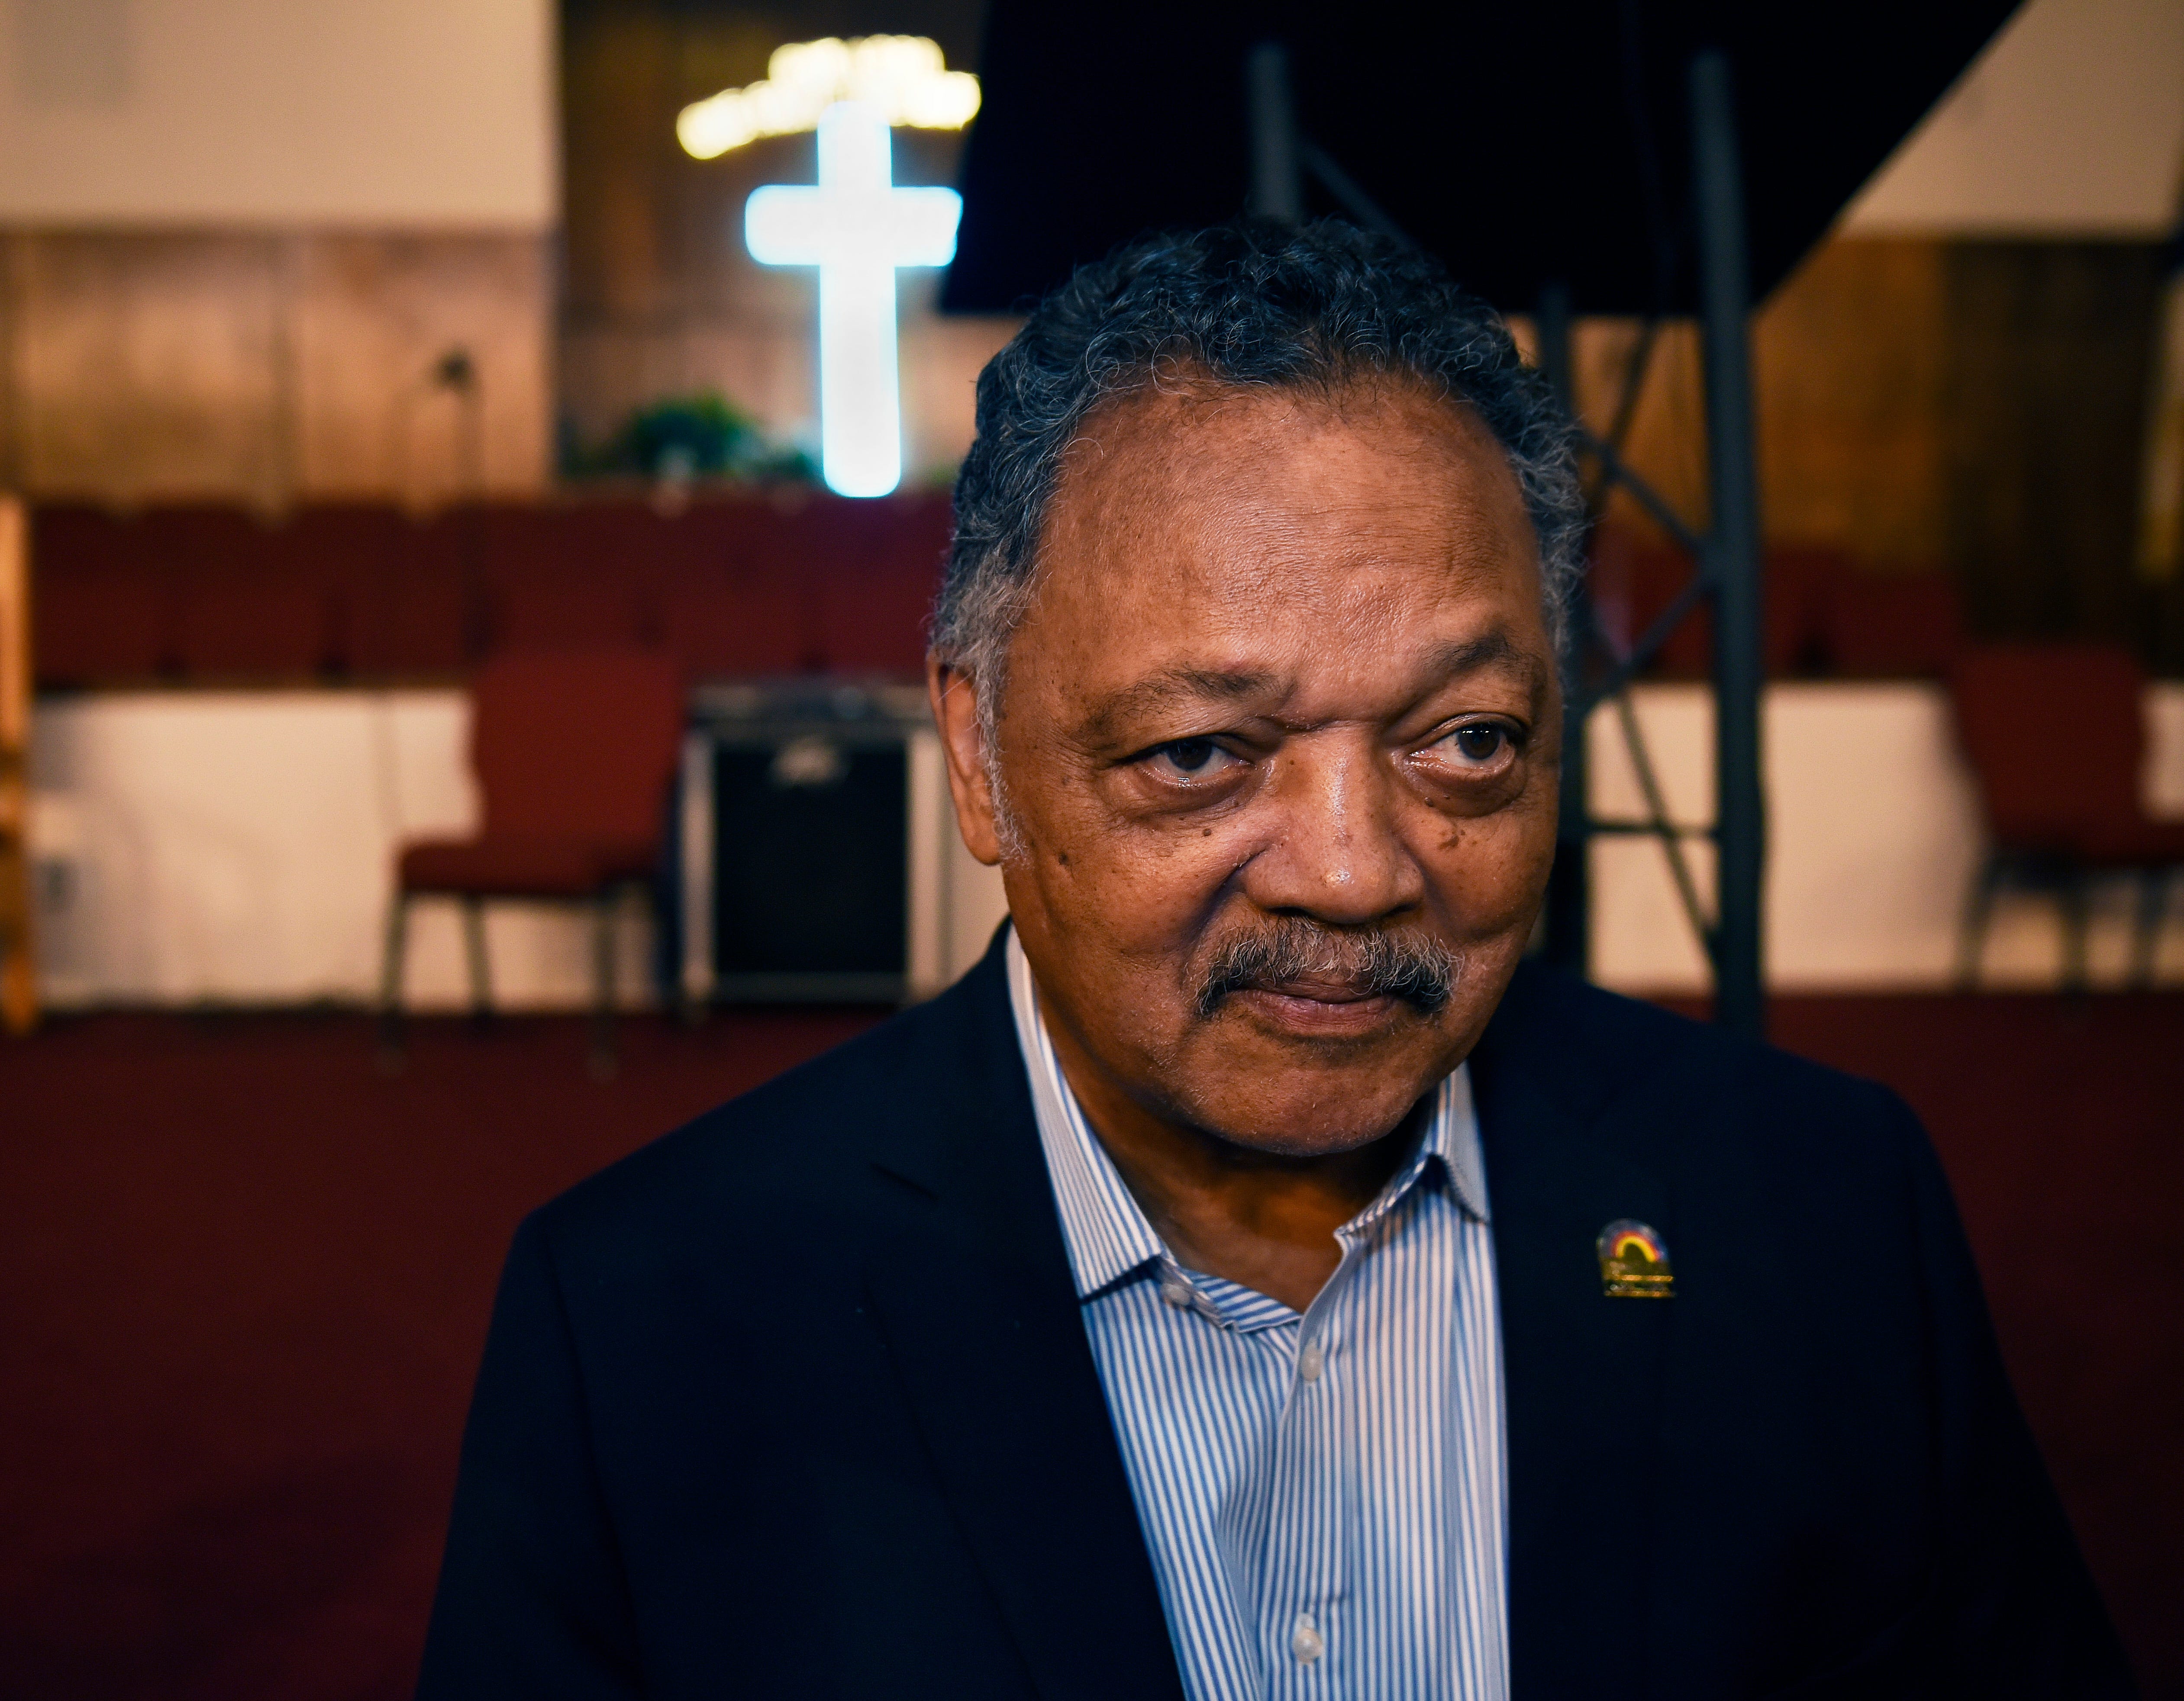 The Rev. Jesse Jackson talks to reporters about the life of Aretha Franklin in New Bethel Baptist Church in Detroit, Thursday, Aug. 16, 2018.